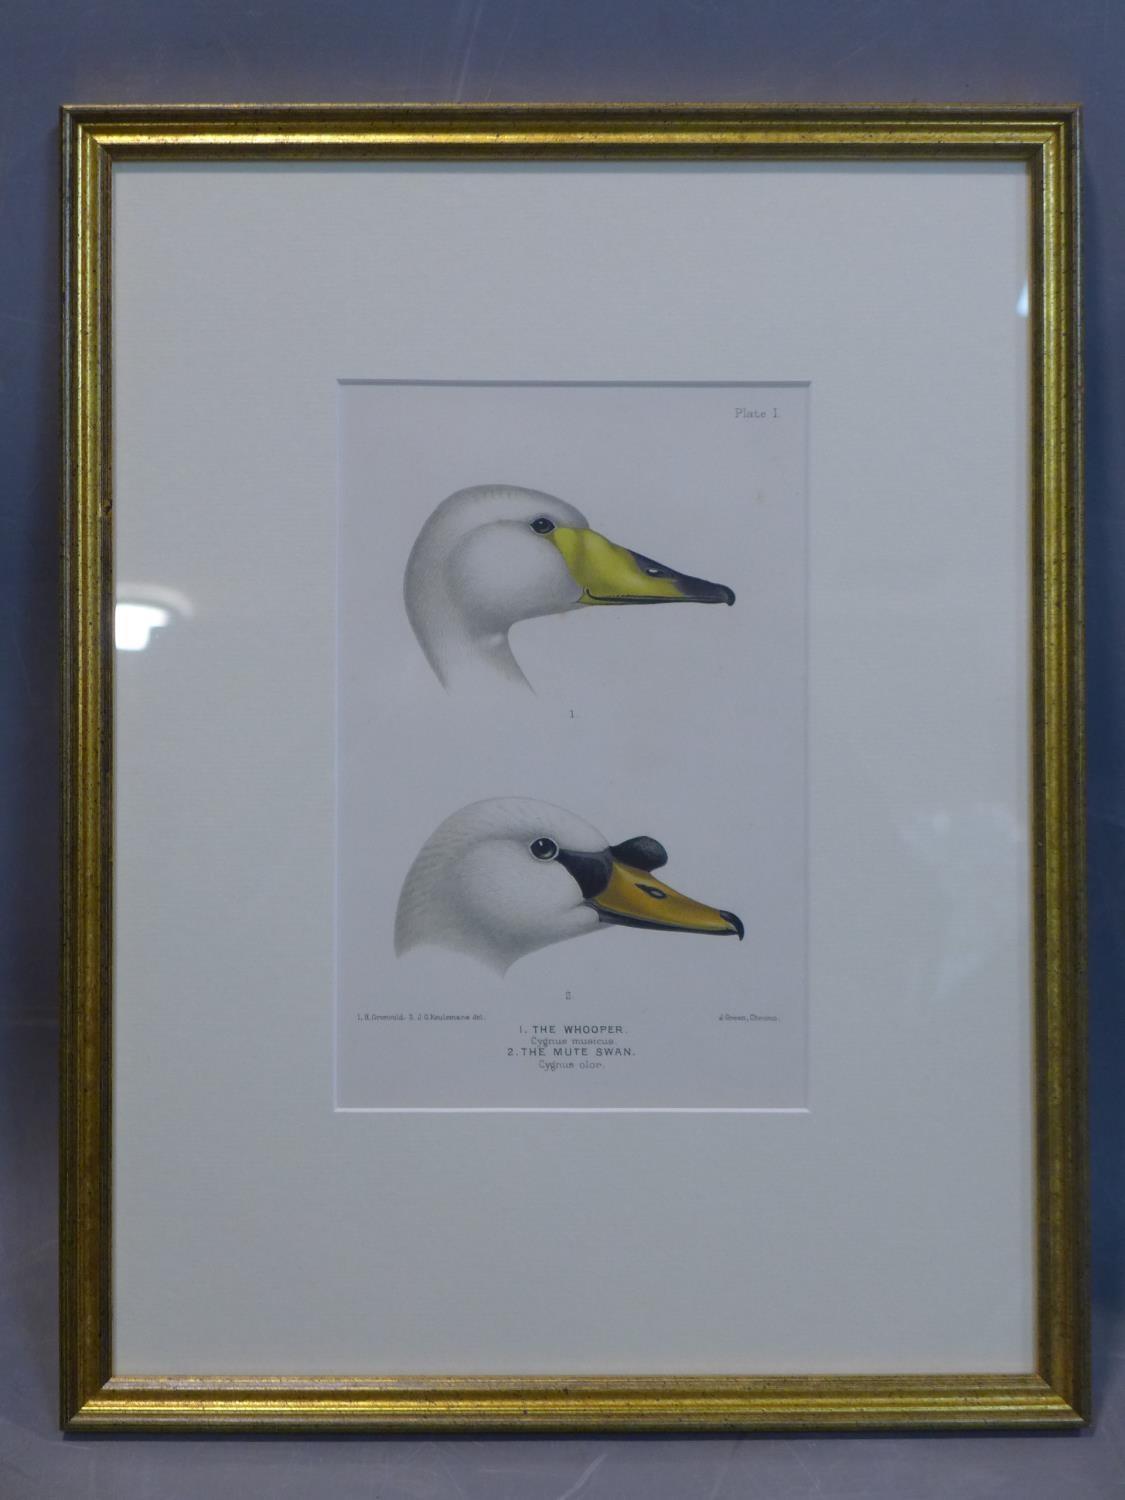 After Johannes Gerardus Keulemans (1842 ? 1912), The whooper and the mute swan, chromo-litography, - Image 2 of 2